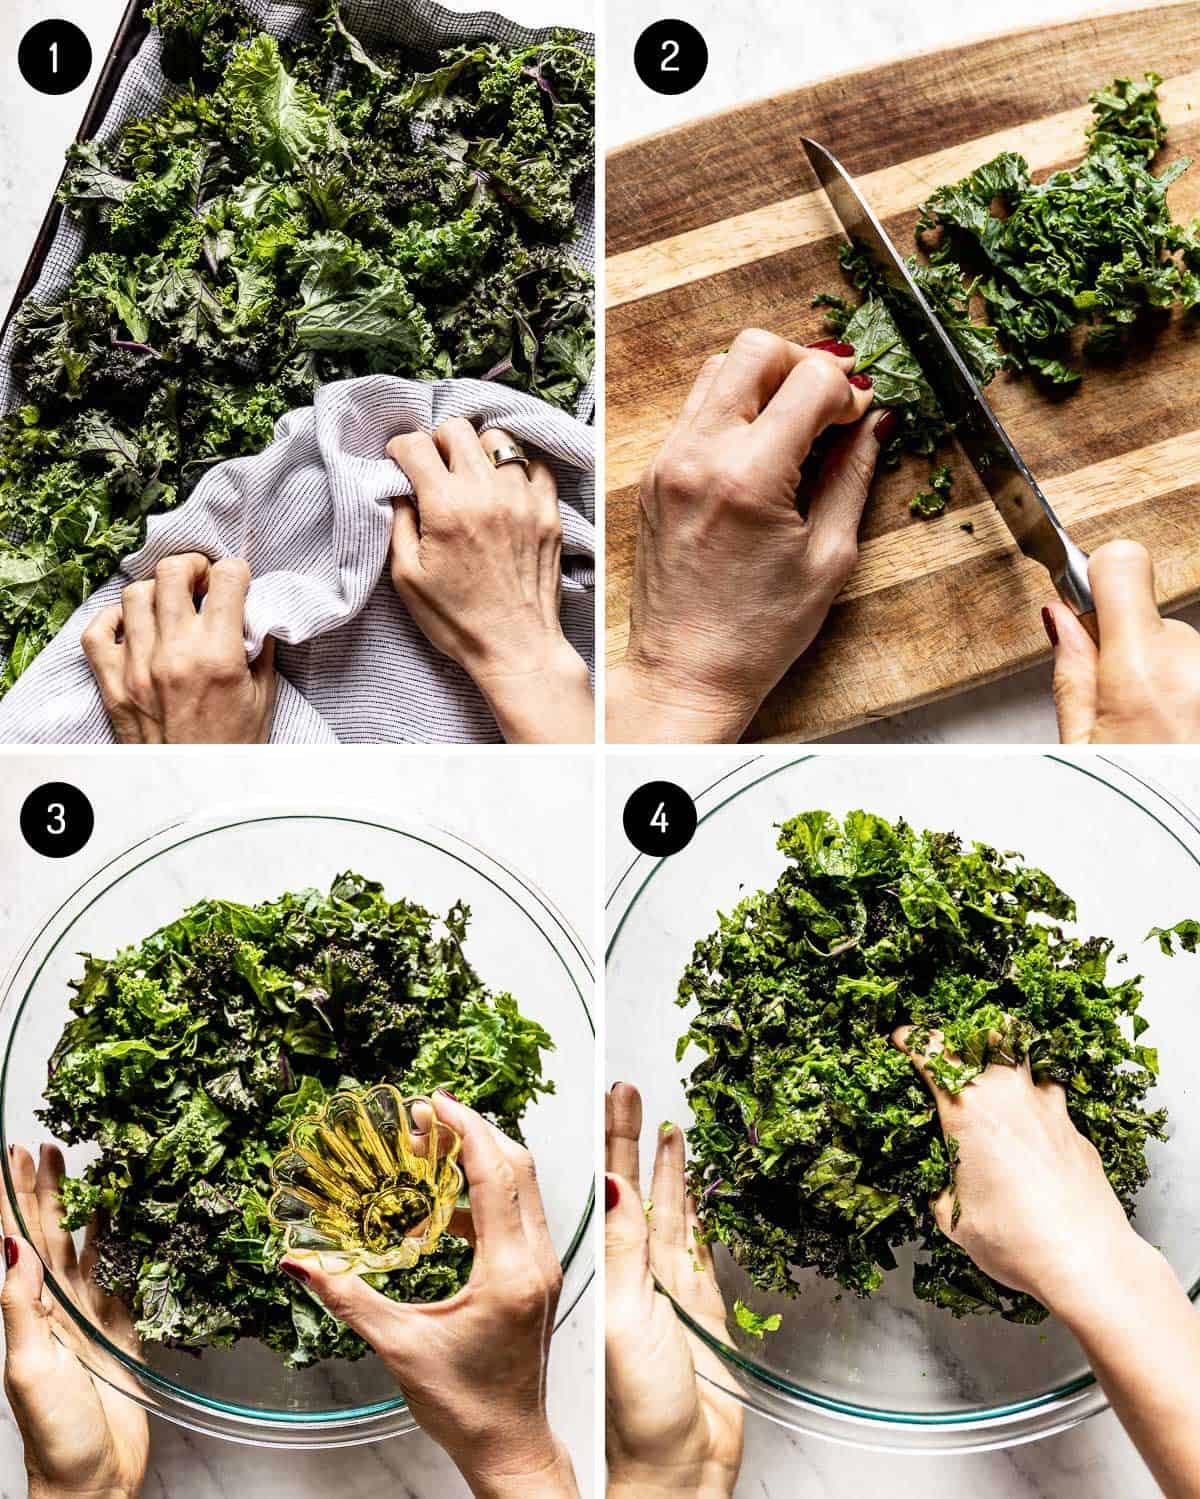 A person showing how to prepare and massage kale from the top view.